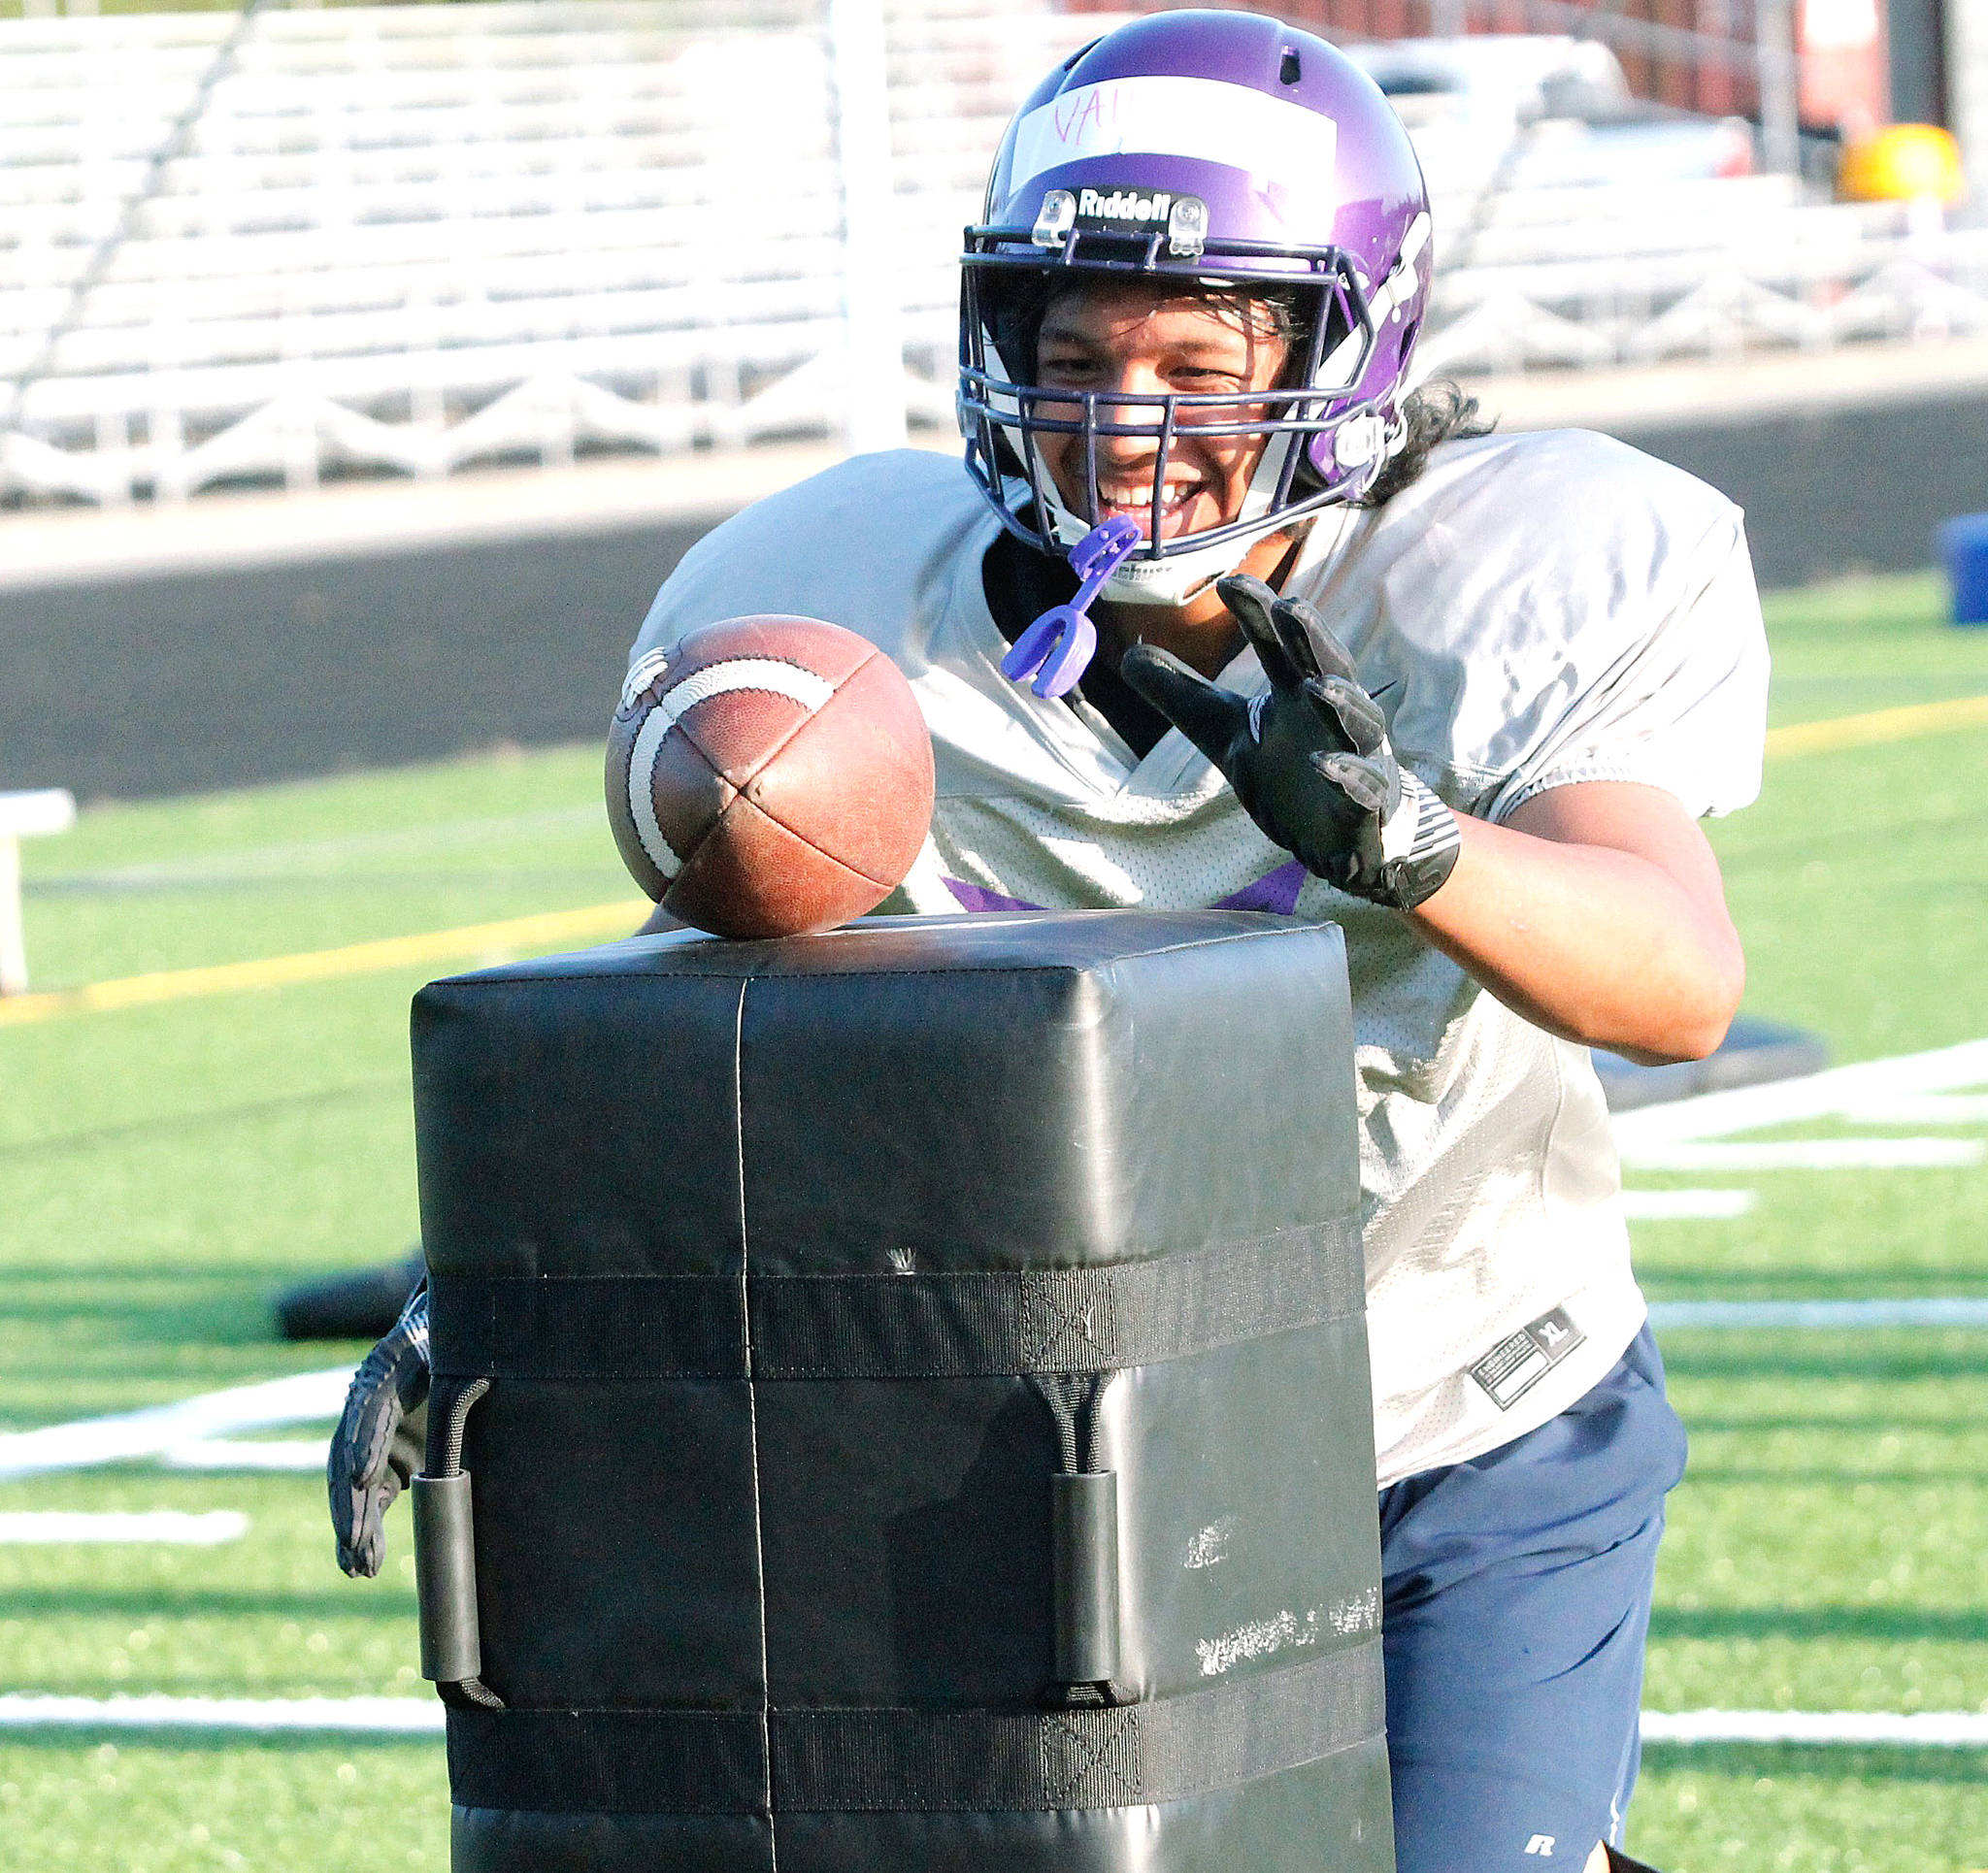 Happy to be back — North Kitsap sophomore EJ Vailolo goes for the ball in a drill during this week’s football practice. The Vikings’ first game is Sept. 3. (Mark Krulish/Kitsap News Group)